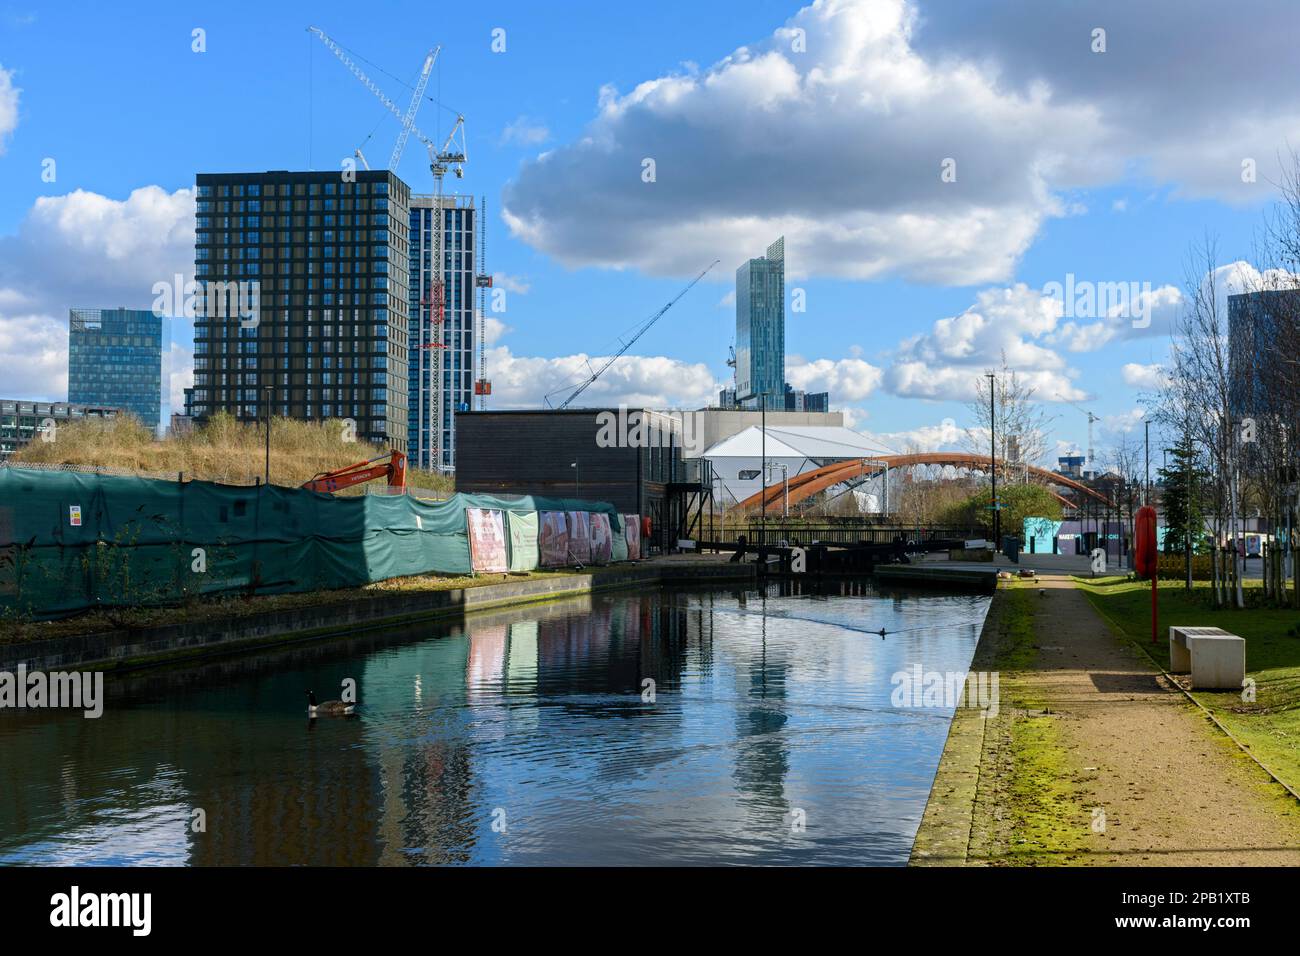 Apartments blocks at the Middlewood Locks development, from the Manchester, Bolton and Bury Canal, Salford, Manchester, England, UK Stock Photo